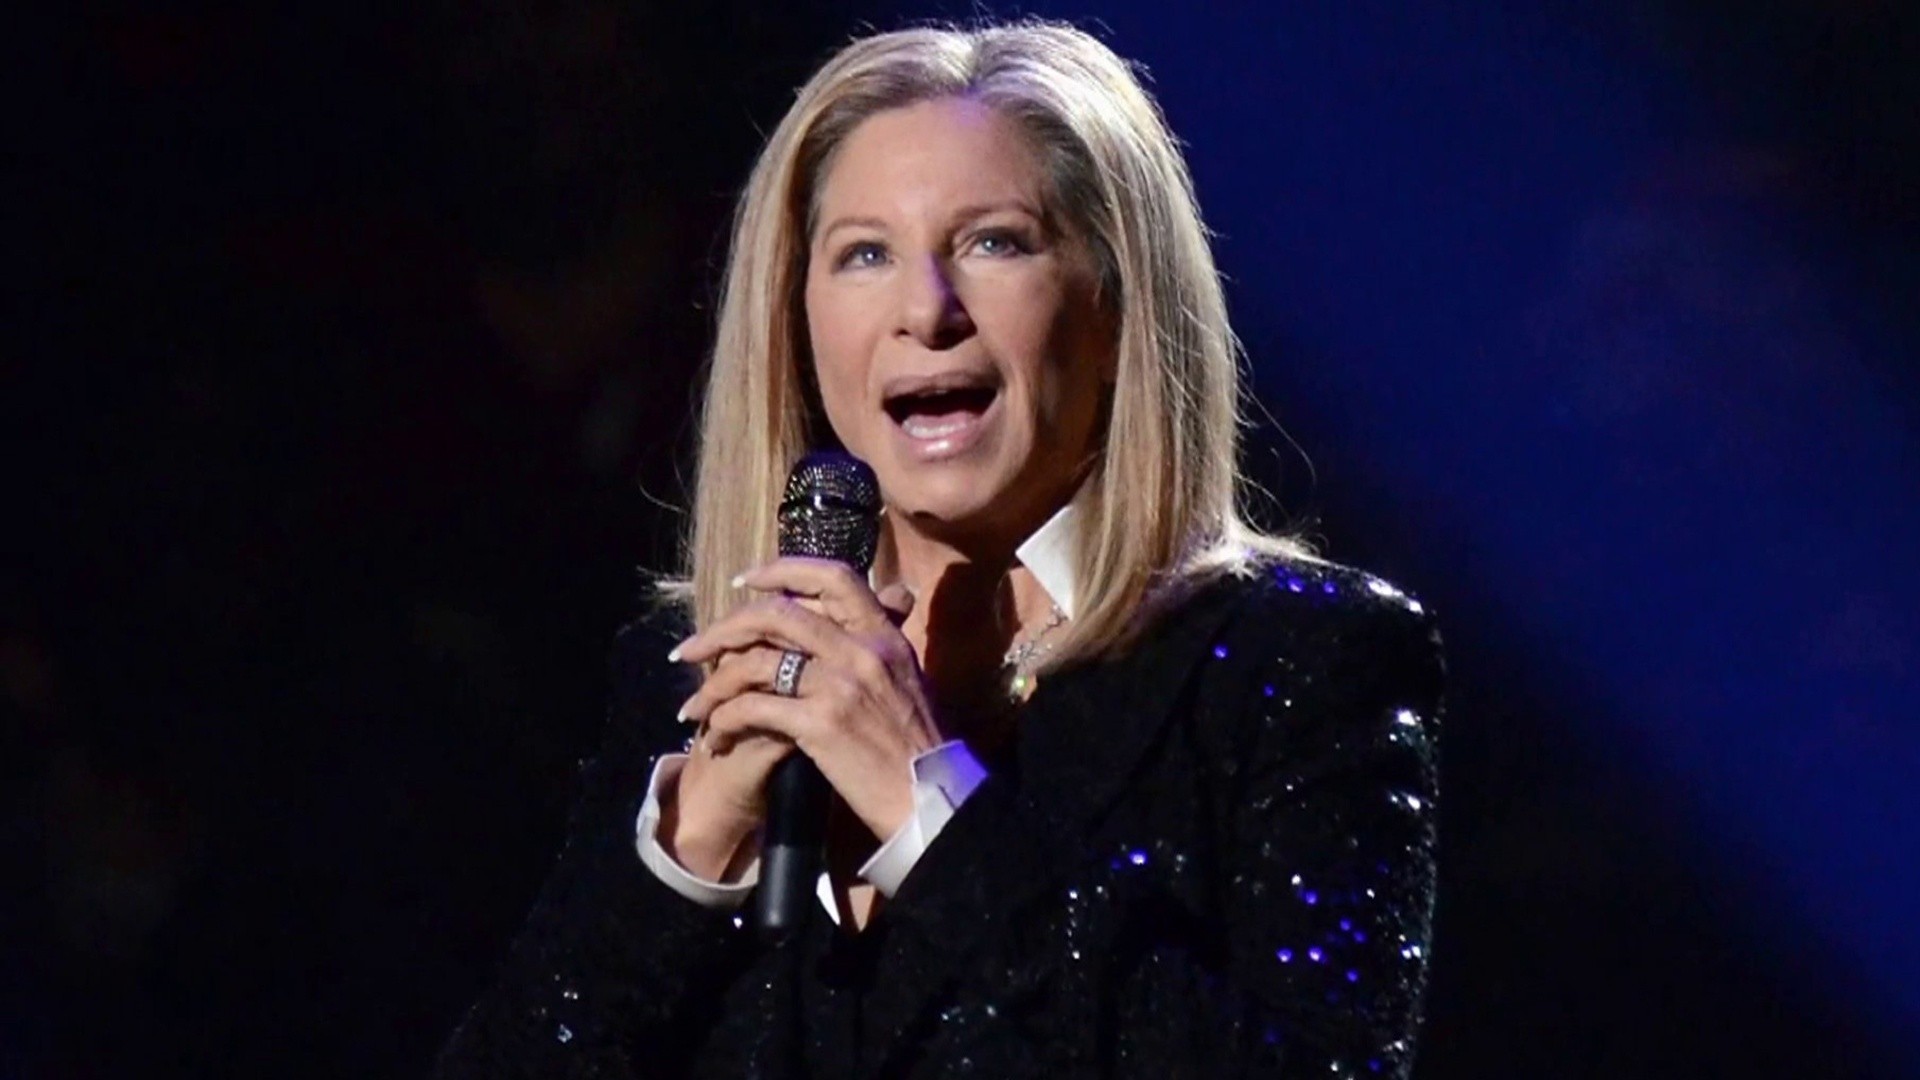 Barbra Streisand asked Apple to change how Siri says her name